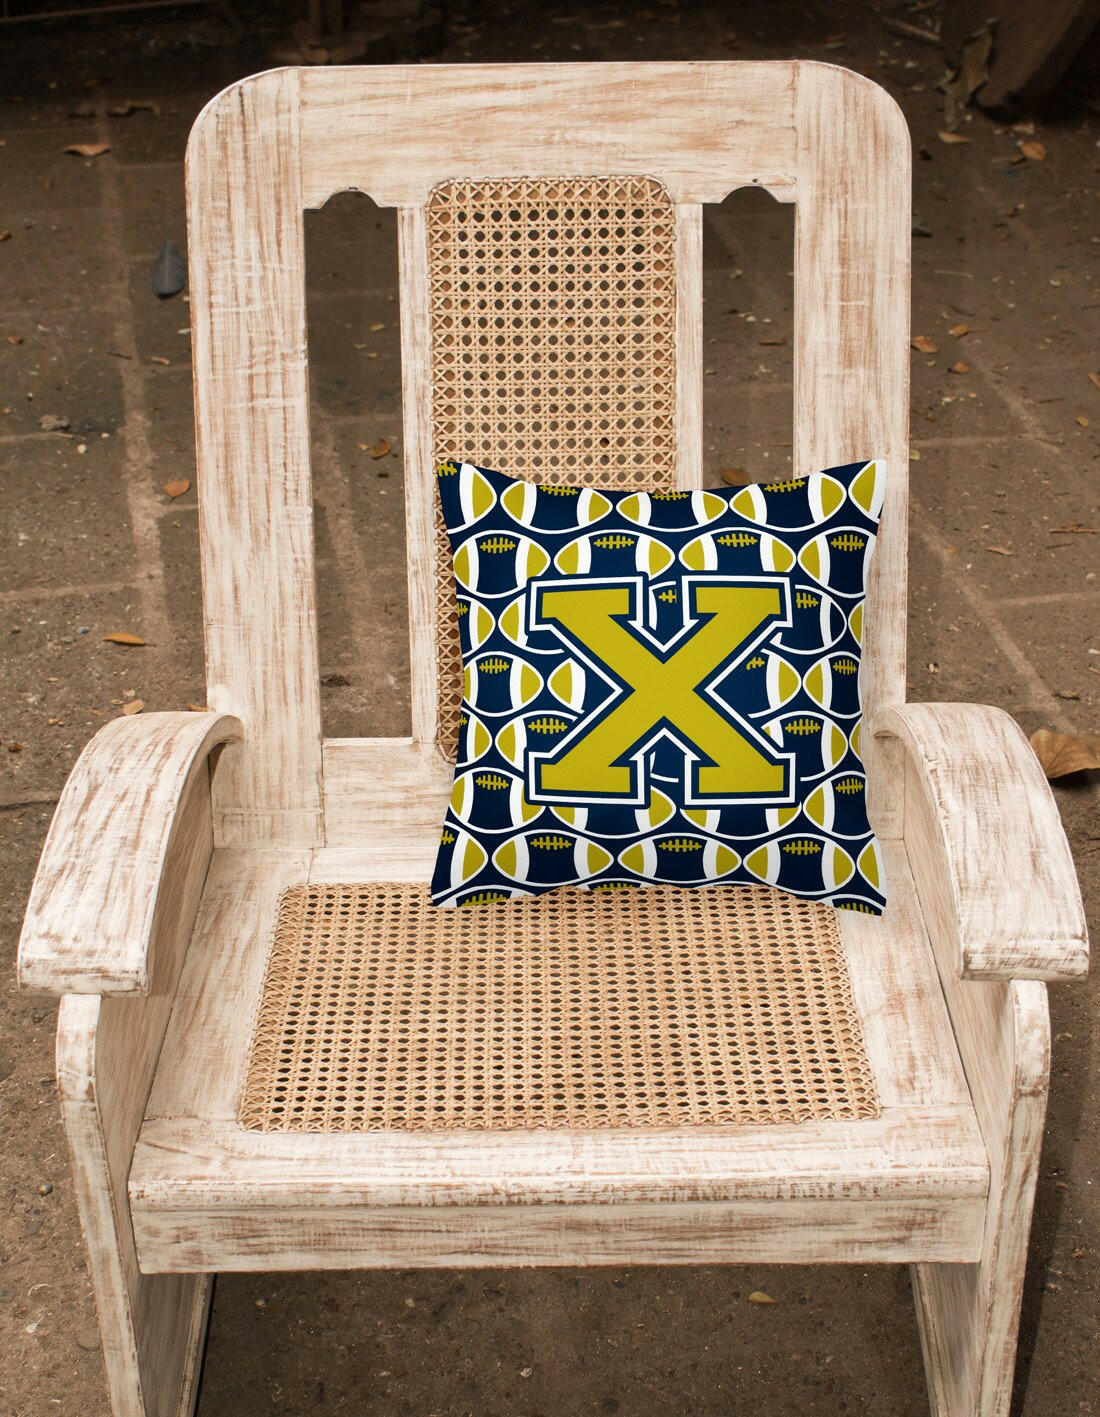 Letter X Football Blue and Gold Fabric Decorative Pillow CJ1074-XPW1414 by Caroline's Treasures